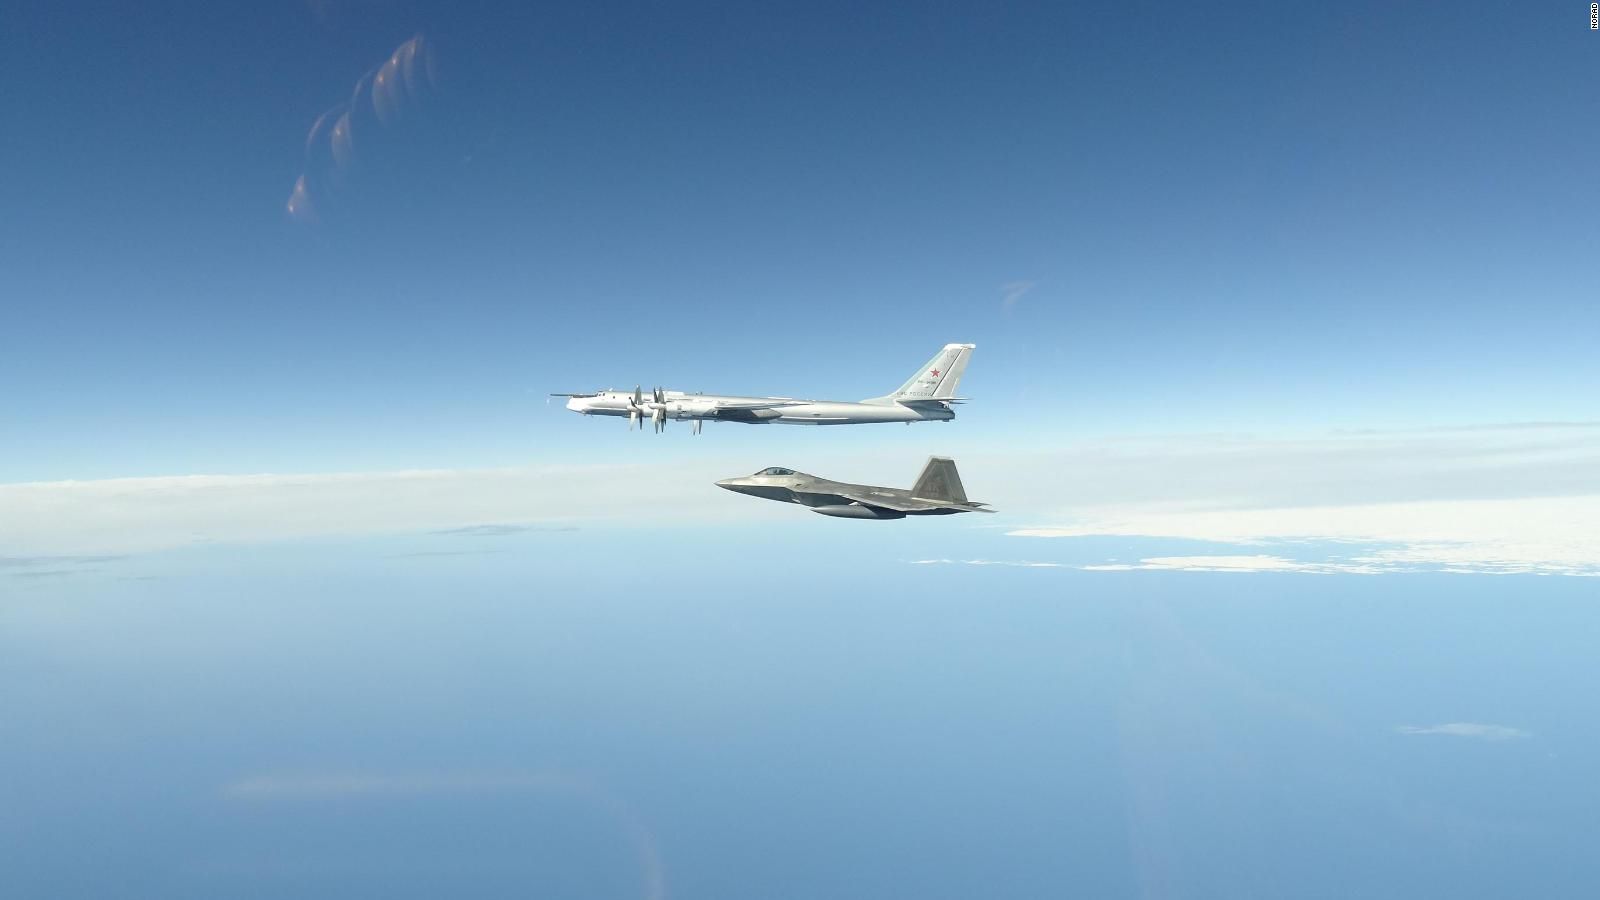 US fighter jets again intercept Russian military aircraft near